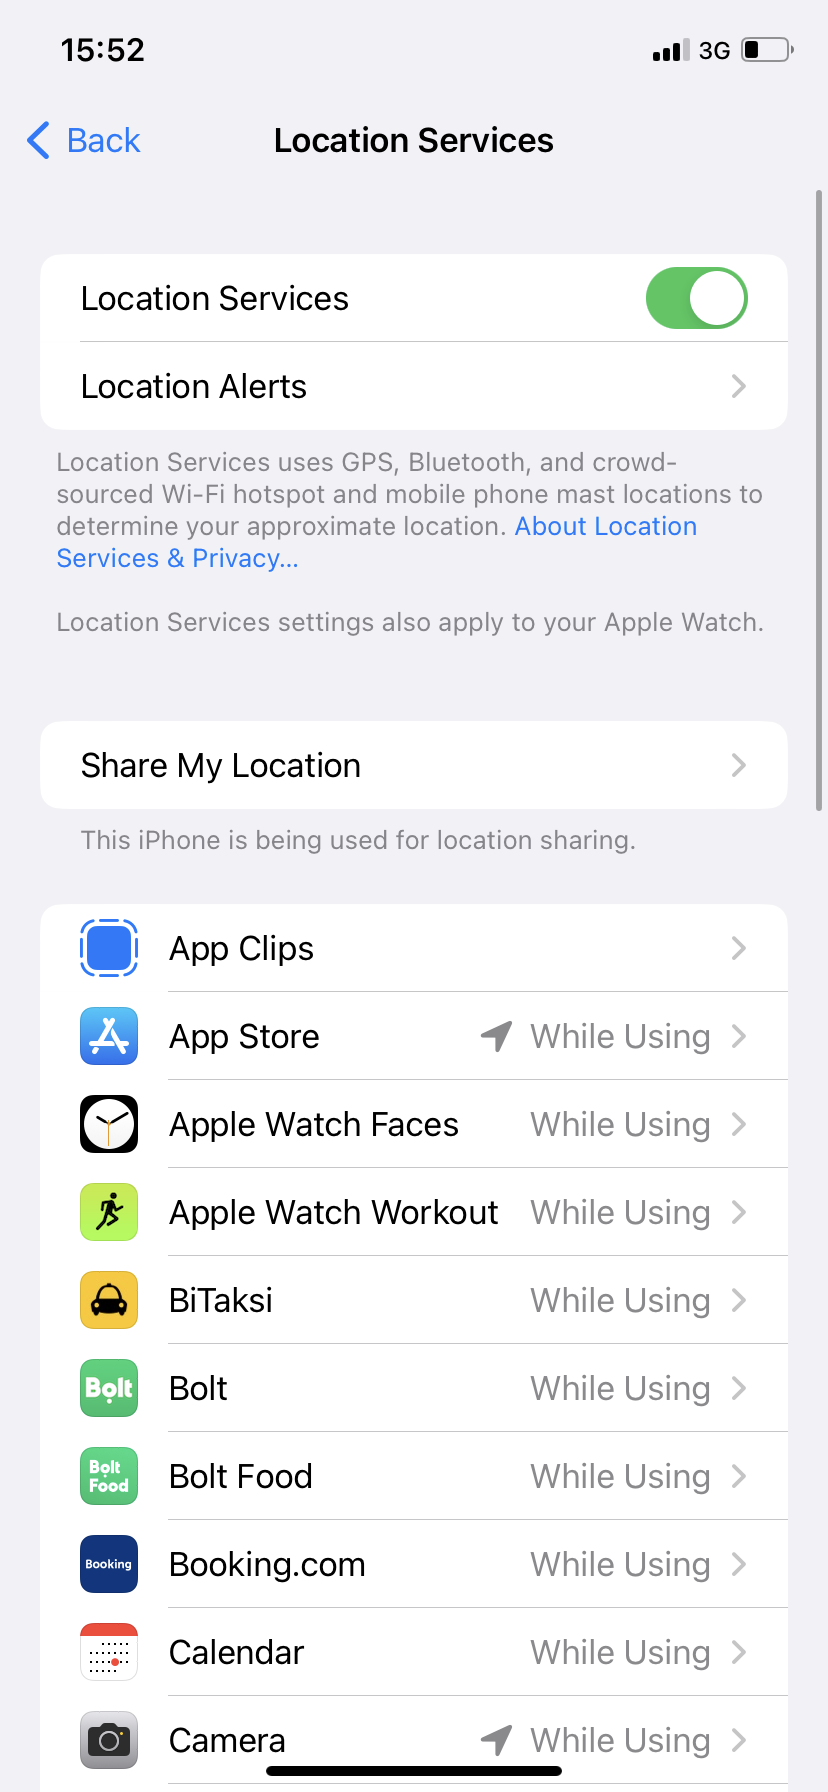 Go Settings > Privacy & Security and then click Location service to turn off location on iPhone.